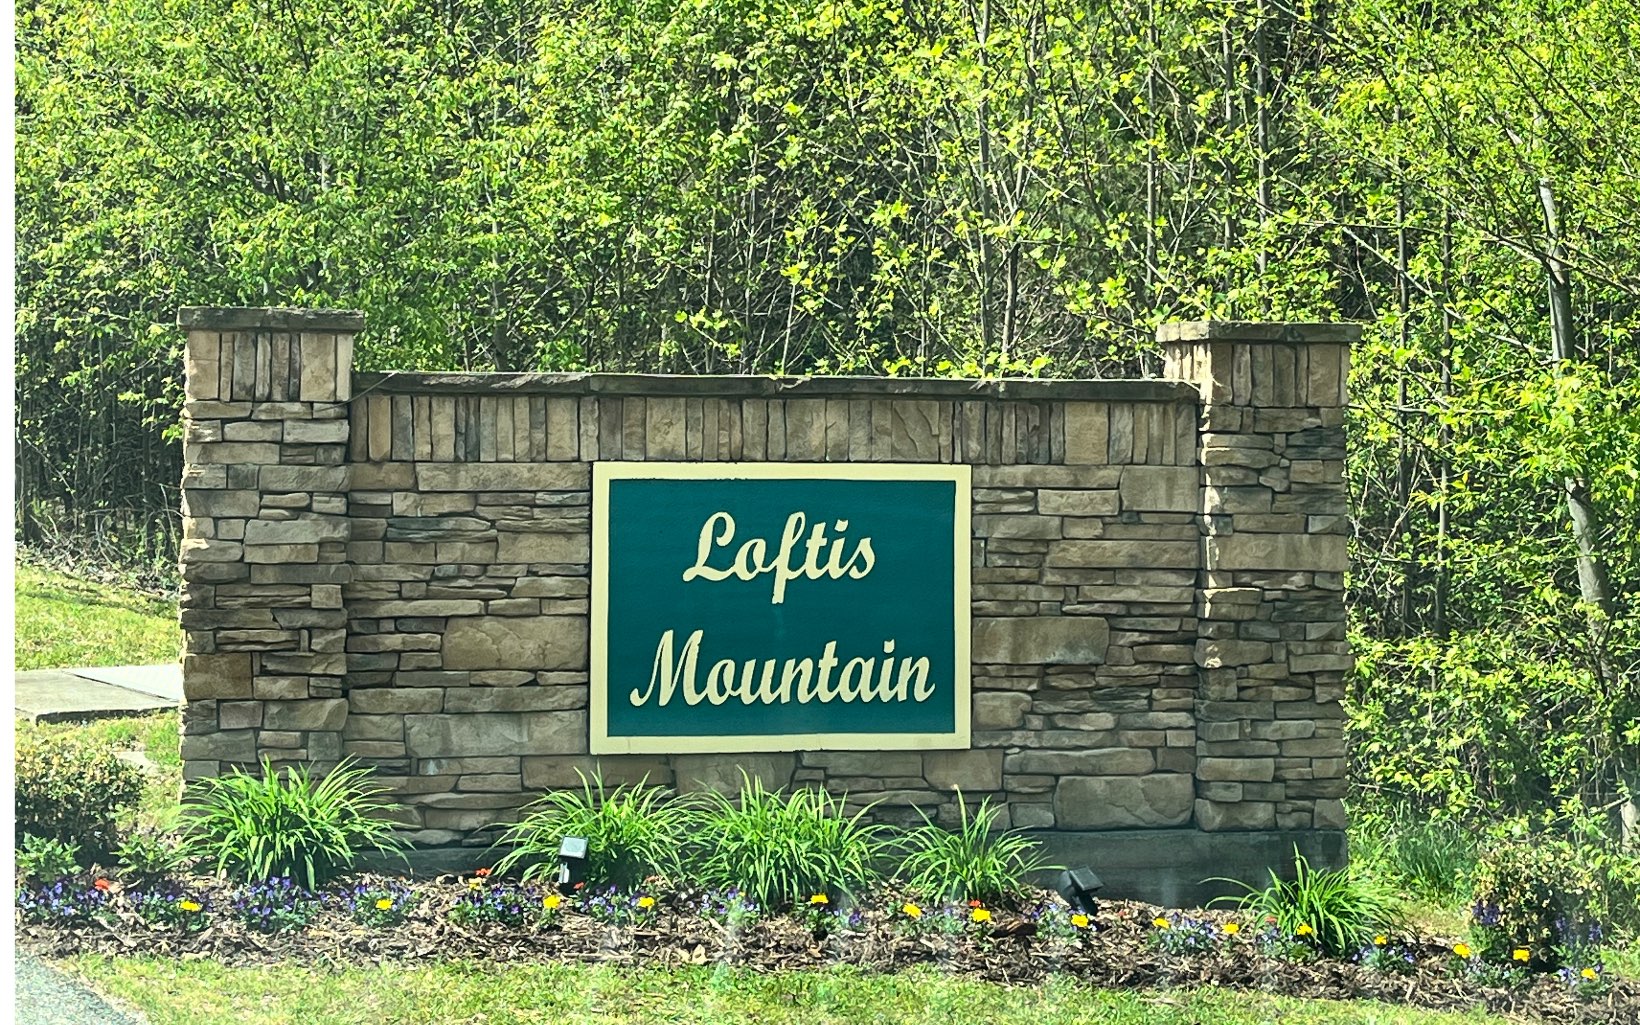 This subdivision is a hidden gem and the perfect location for your dream home. Get two wooded lots with 2.18 acres and has the potential for AMAZING MOUNTAIN VIEWS. Close to town but feels like you are out in the country. Loftis Mtn is an upscale community near Lake Nottely offering privacy and quiet. The community offers roads roads, water, underground electric, and fire hydrants. Located near shopping, restaurants and recreational activities. Close to Blairsville and Murphy.